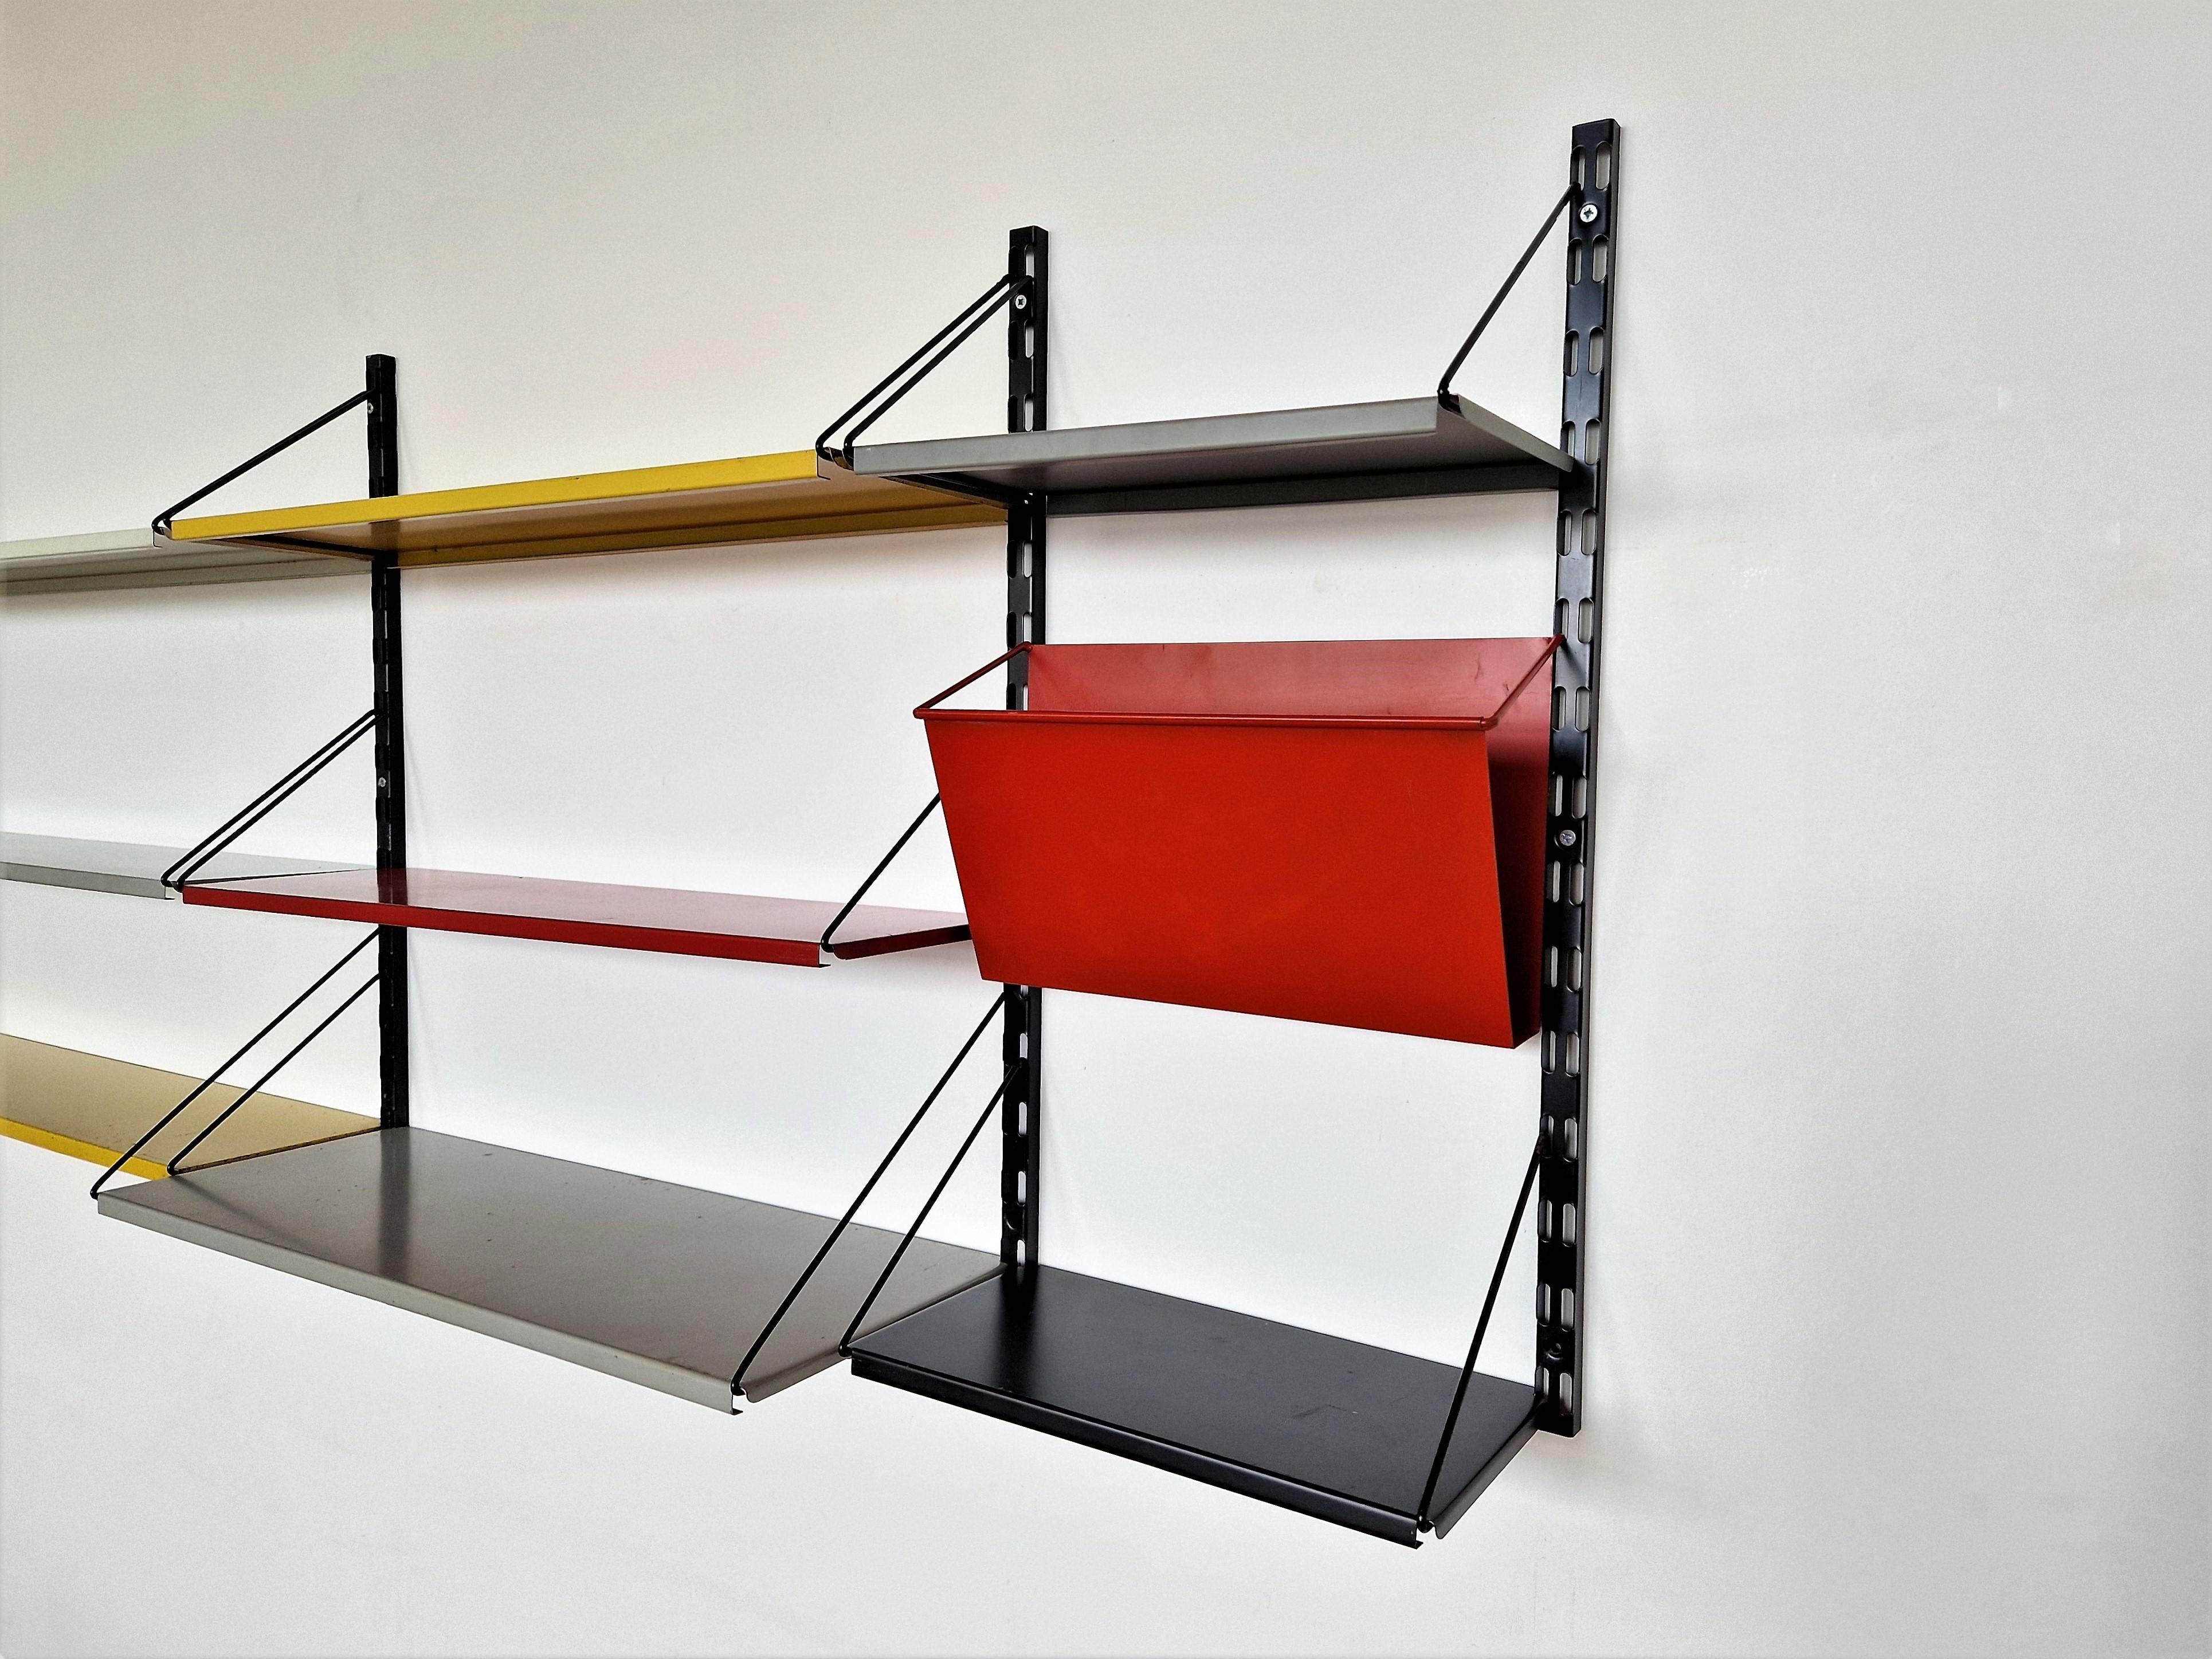 Mid-20th Century Multicolored Wall Unit by Tjerk Rijenga for Pilastro, the Netherlands 1960's For Sale